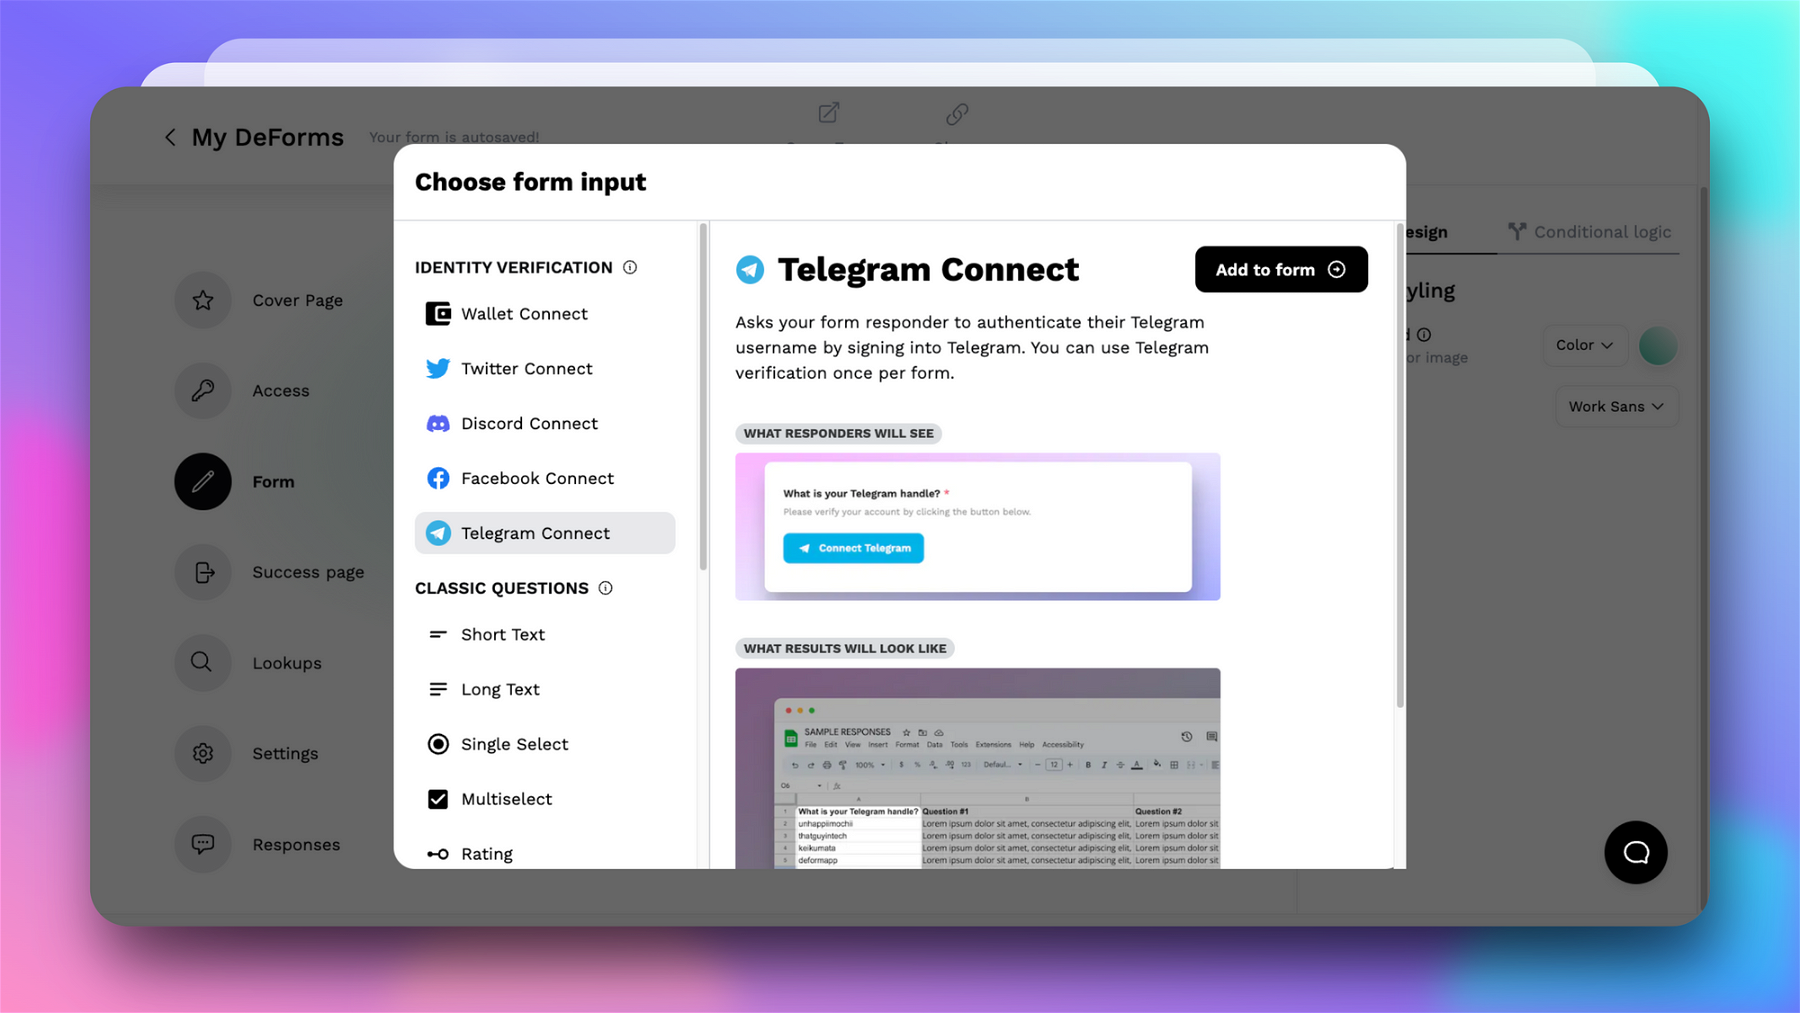 Using the Telegram Connect option will allow responders to authenticate their Telegram username by signing into Telegram.